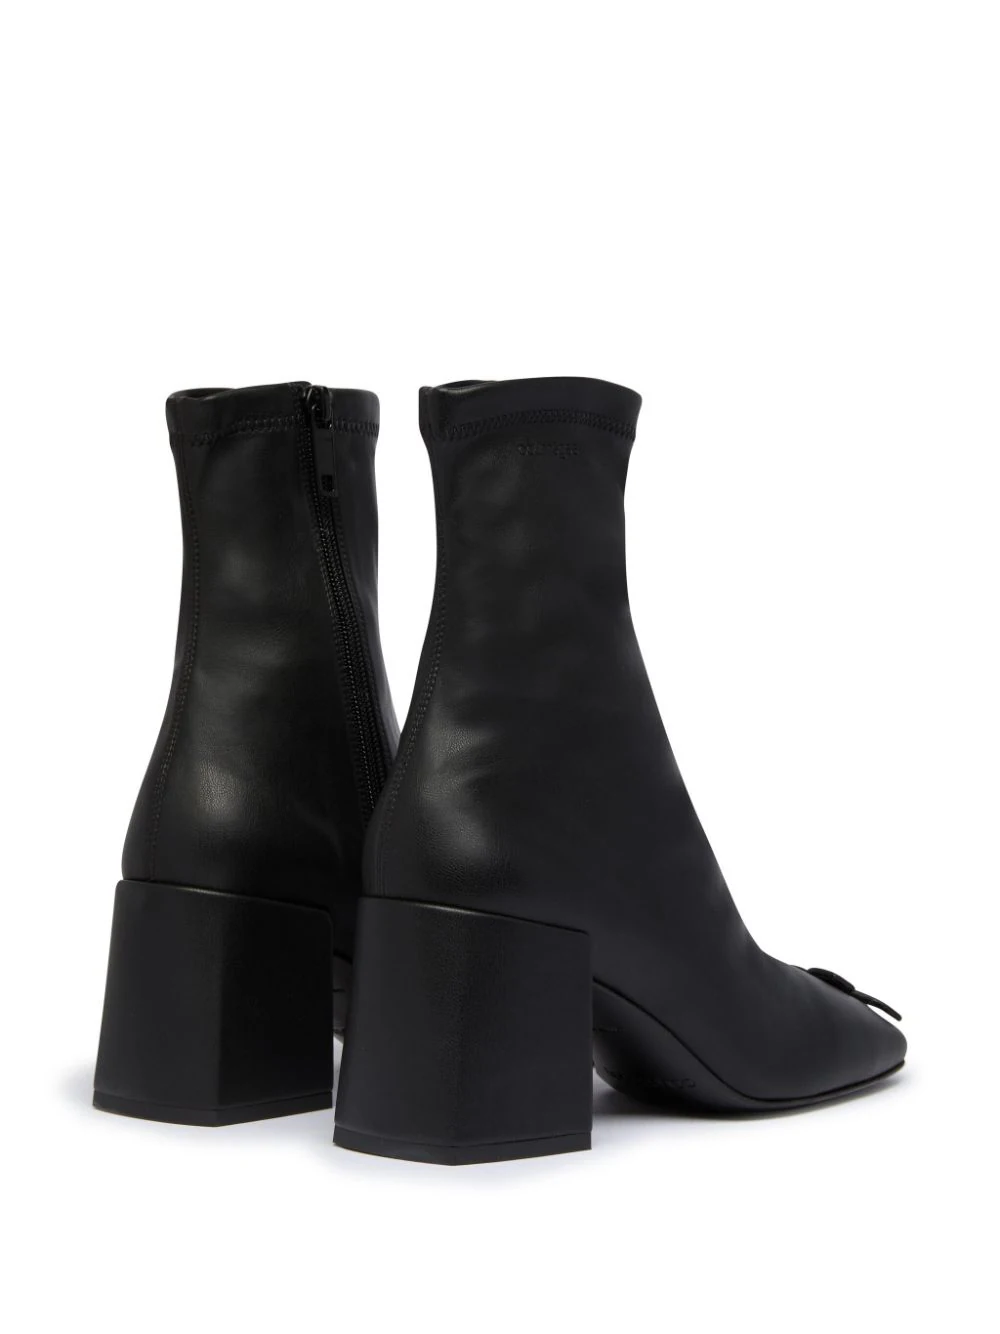 courreges-Reedition-Eco-Leather-Ankle-Boots-Black-3